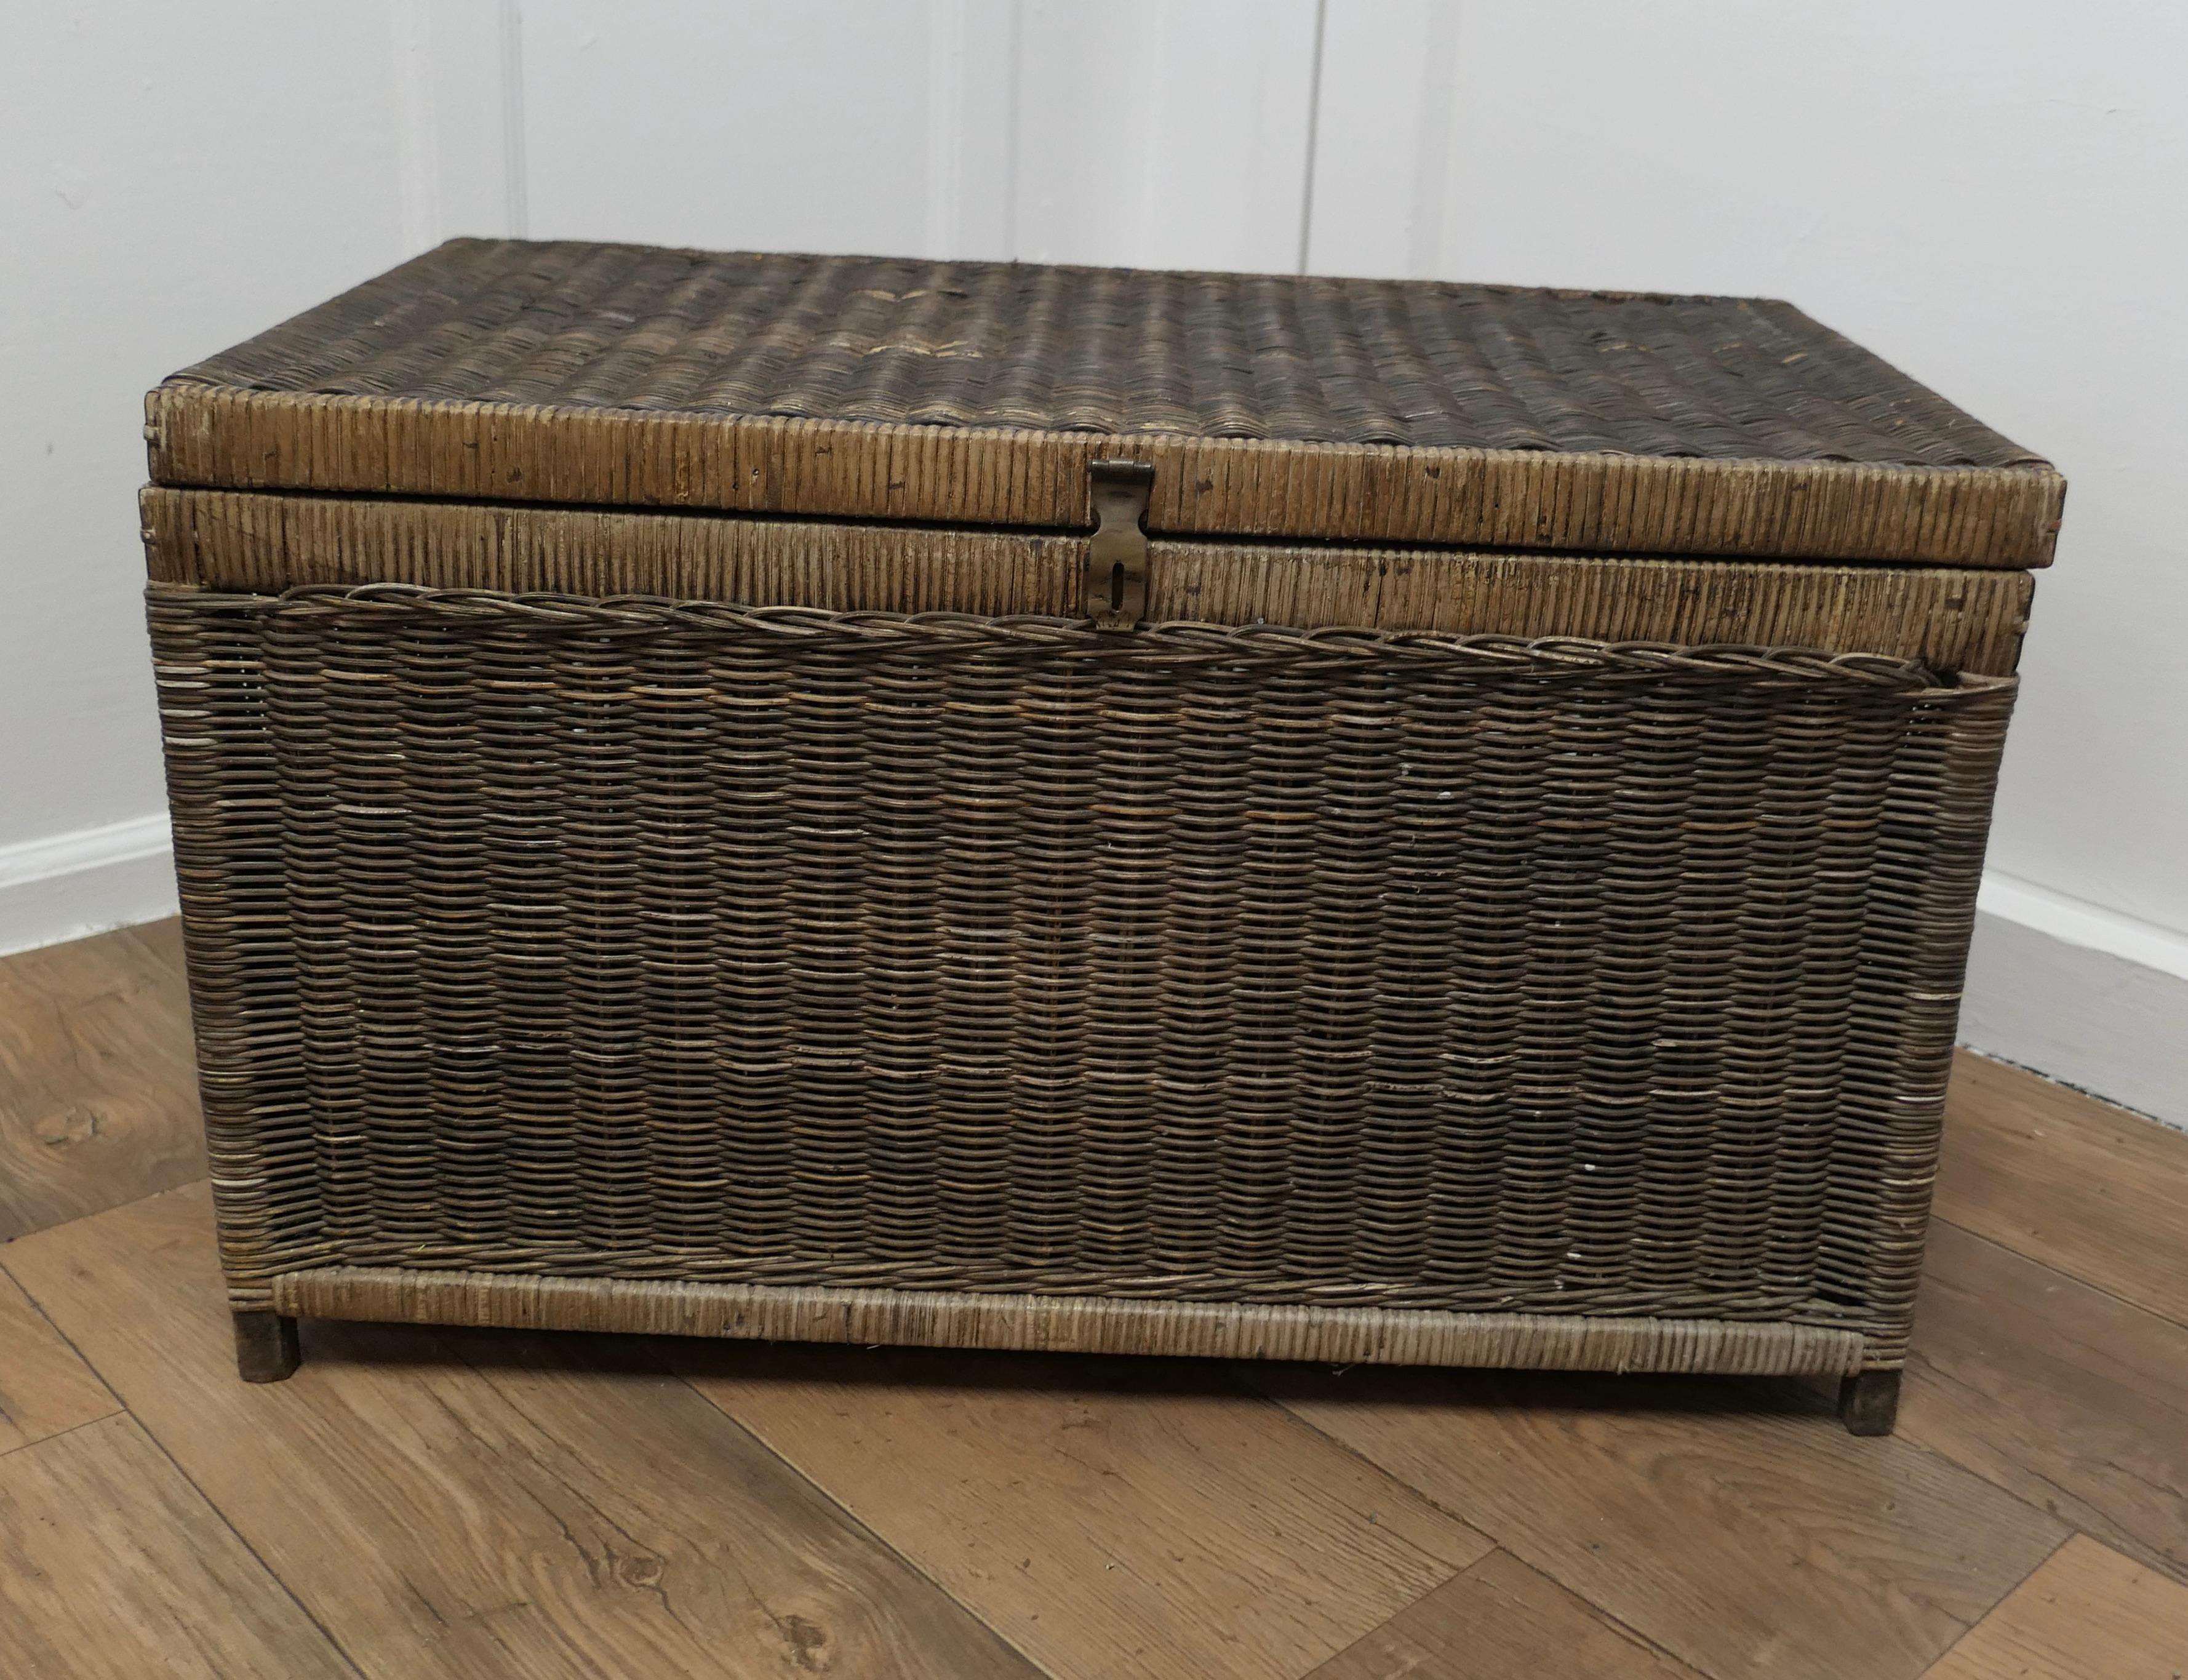 19th Century Woven Wicker Vintage Travel Chest 

A very useful decorative travel trunk, the Trunk is covered made in woven cane, which has wonderful age darkened patina
 
The trunk is sturdy has carrying handles and a catch 

A superb piece in